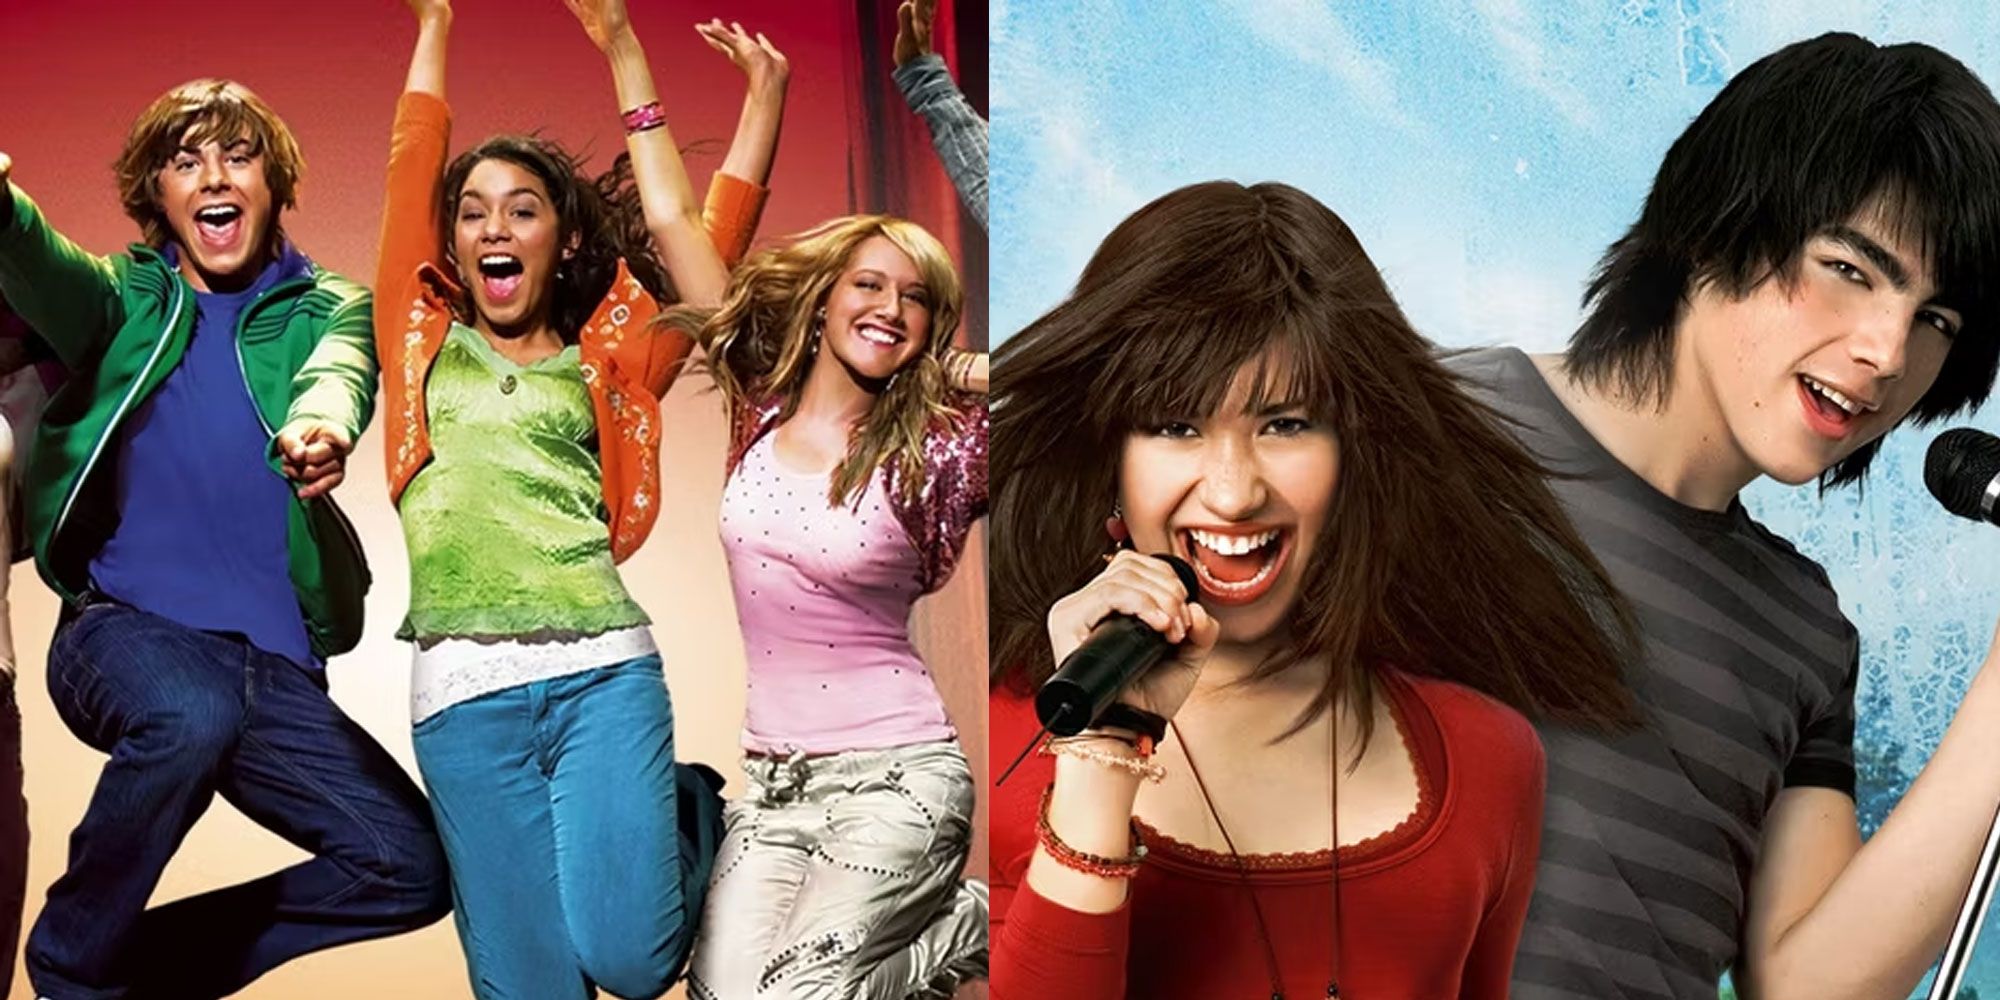 A split image features High School Musical characters Troy, Gabriella, and Sharpay alongside Camp Rock characters Mitchie and Shane